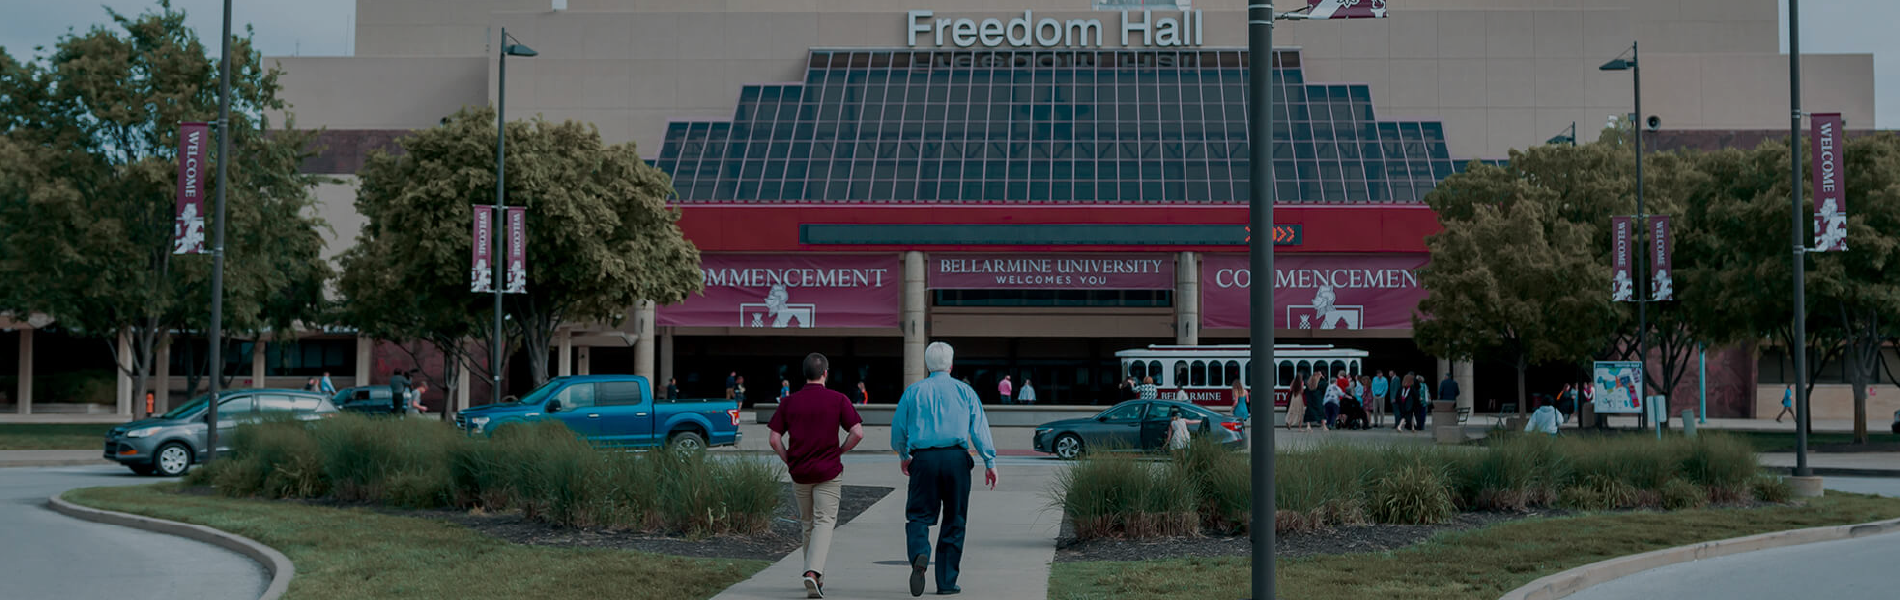 People walking into Freedom Hall at Commencement 2019